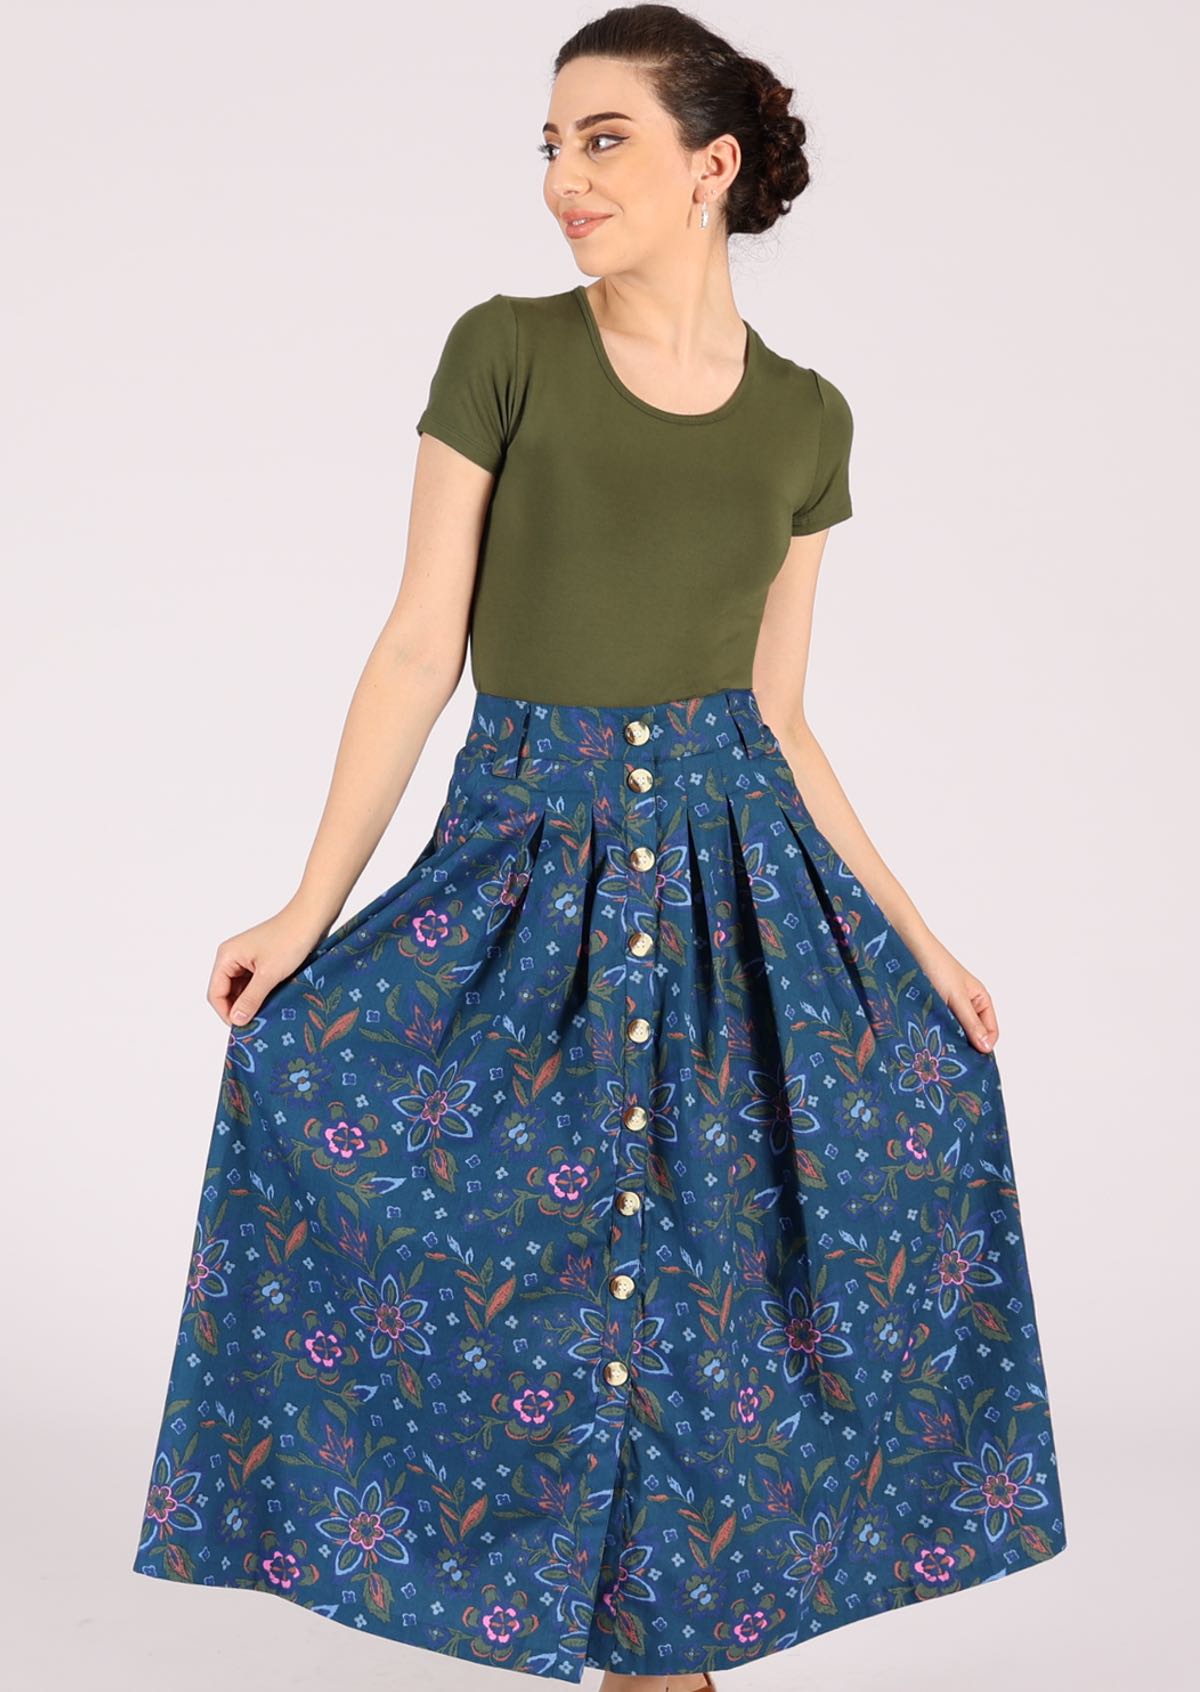 Blue midi skirt features buttons running down the front. 